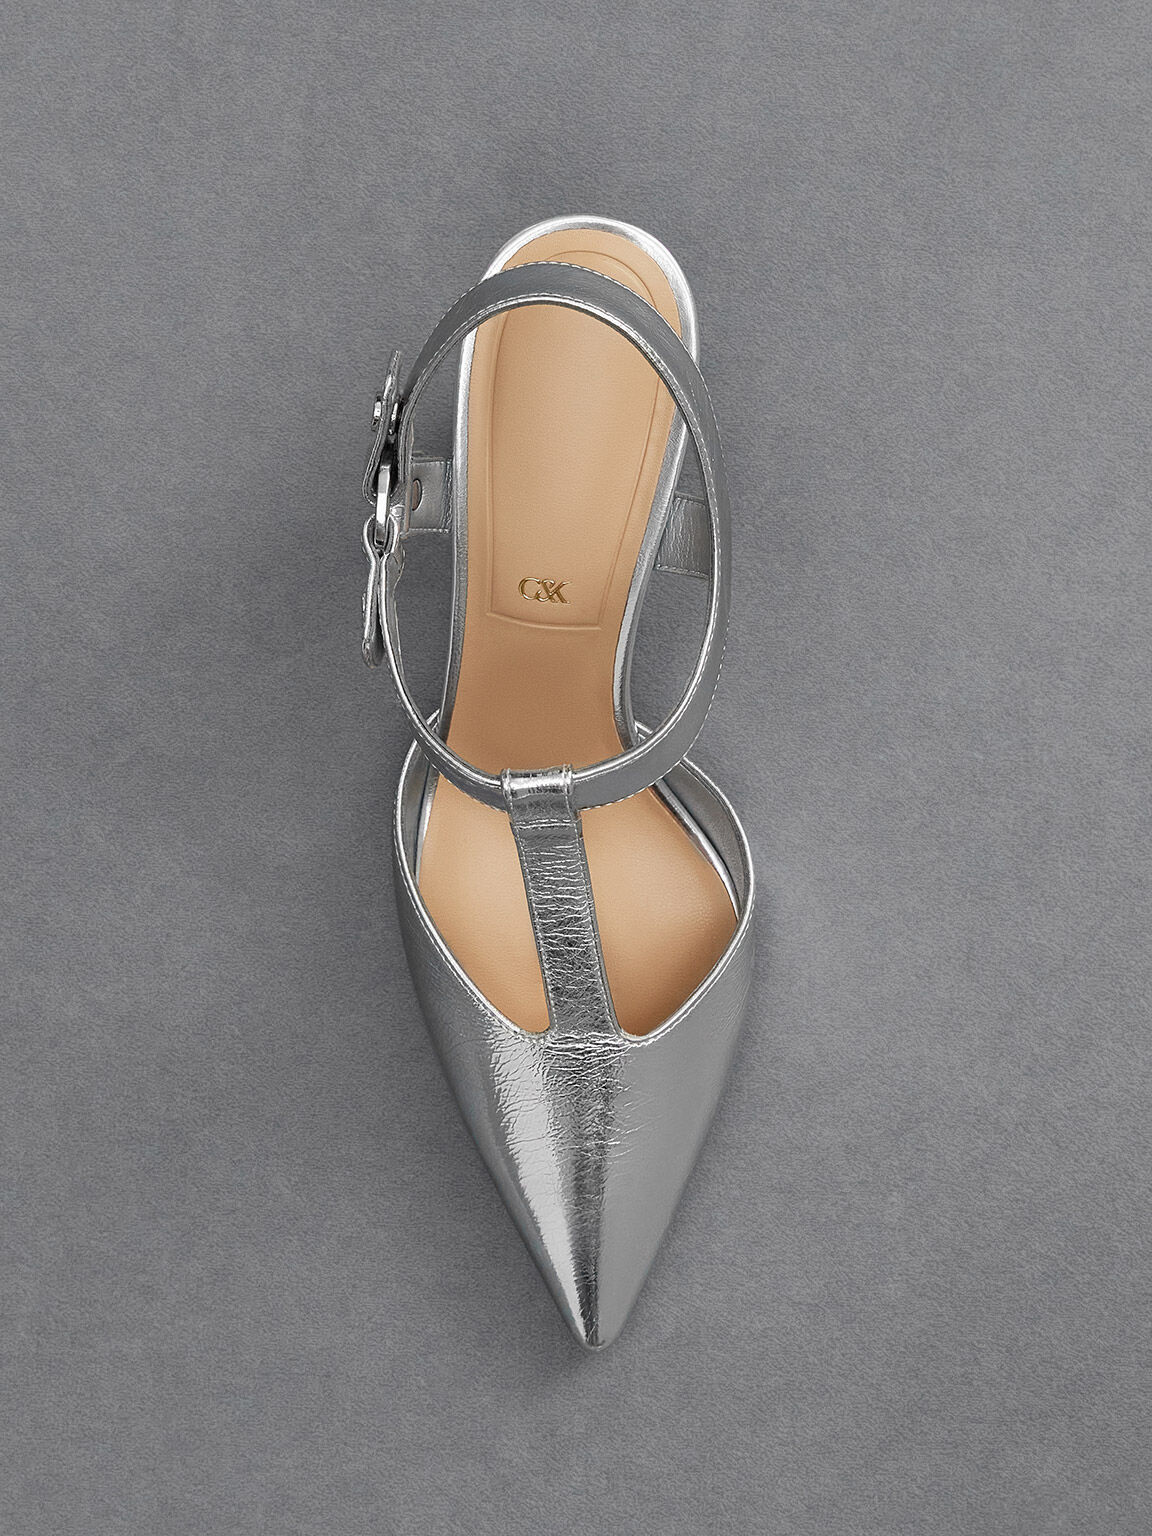 Silver Leather Metallic Buckled T-Bar Pumps - CHARLES & KEITH 